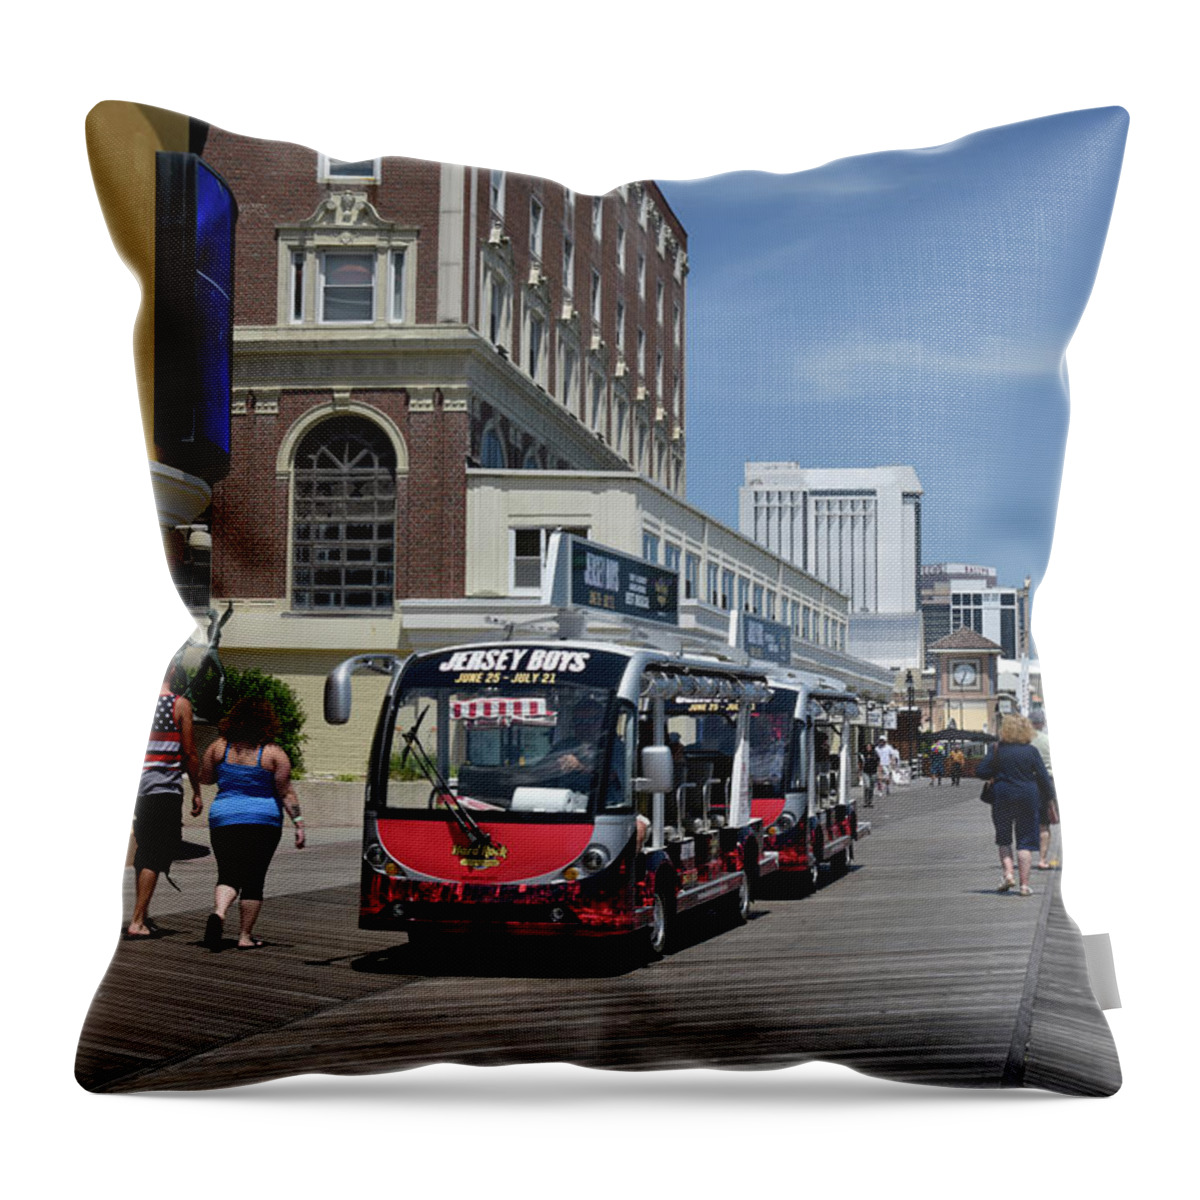 Atlantic City Throw Pillow featuring the photograph The Atlantic City Boardwalk by Mark Stout